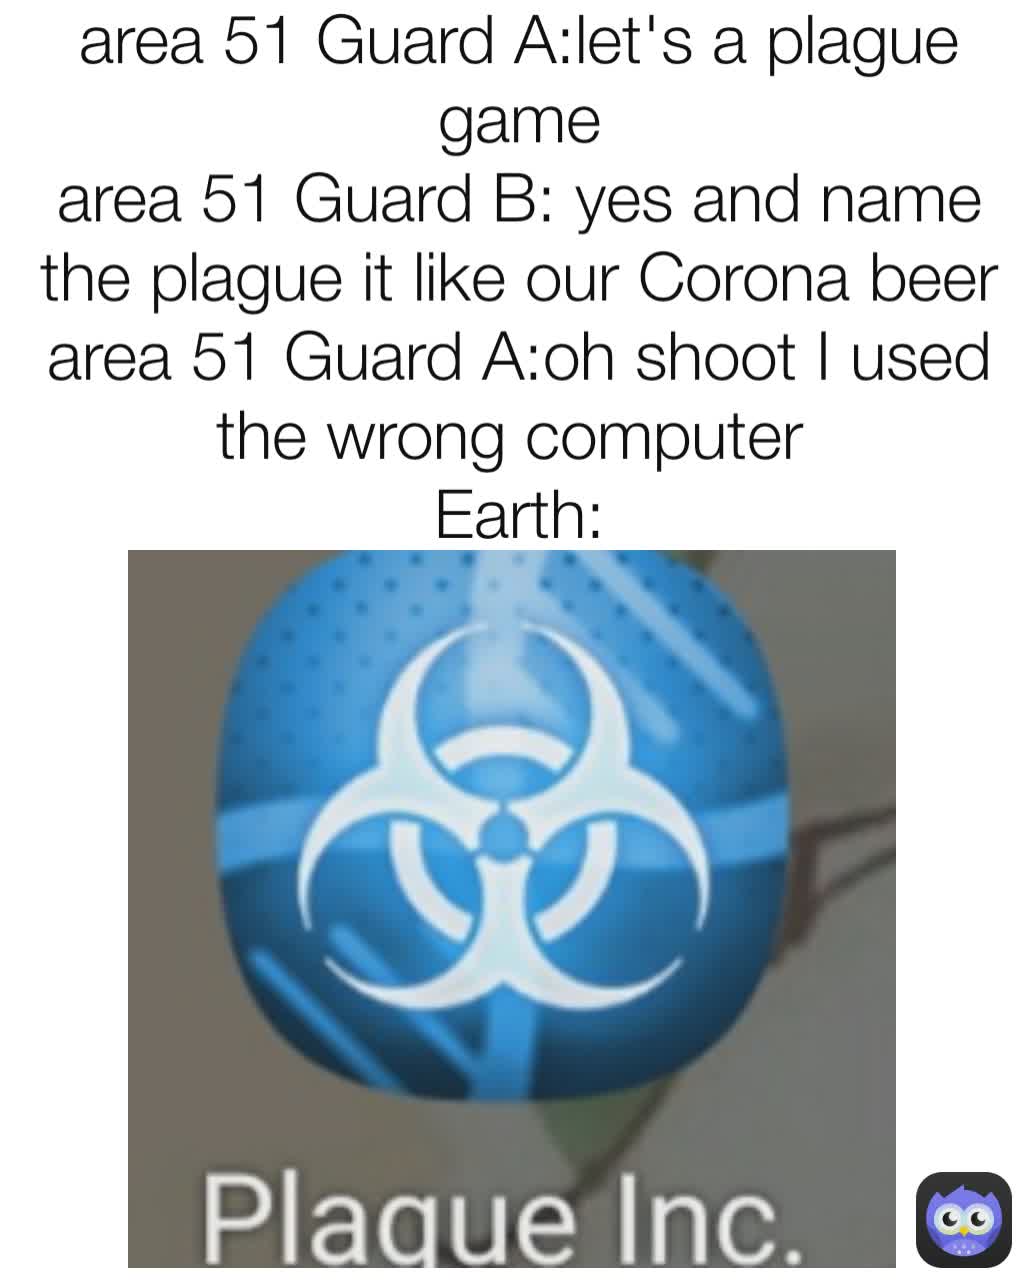 area 51 Guard A:let's a plague game
area 51 Guard B: yes and name the plague it like our Corona beer
area 51 Guard A:oh shoot I used the wrong computer 
Earth: